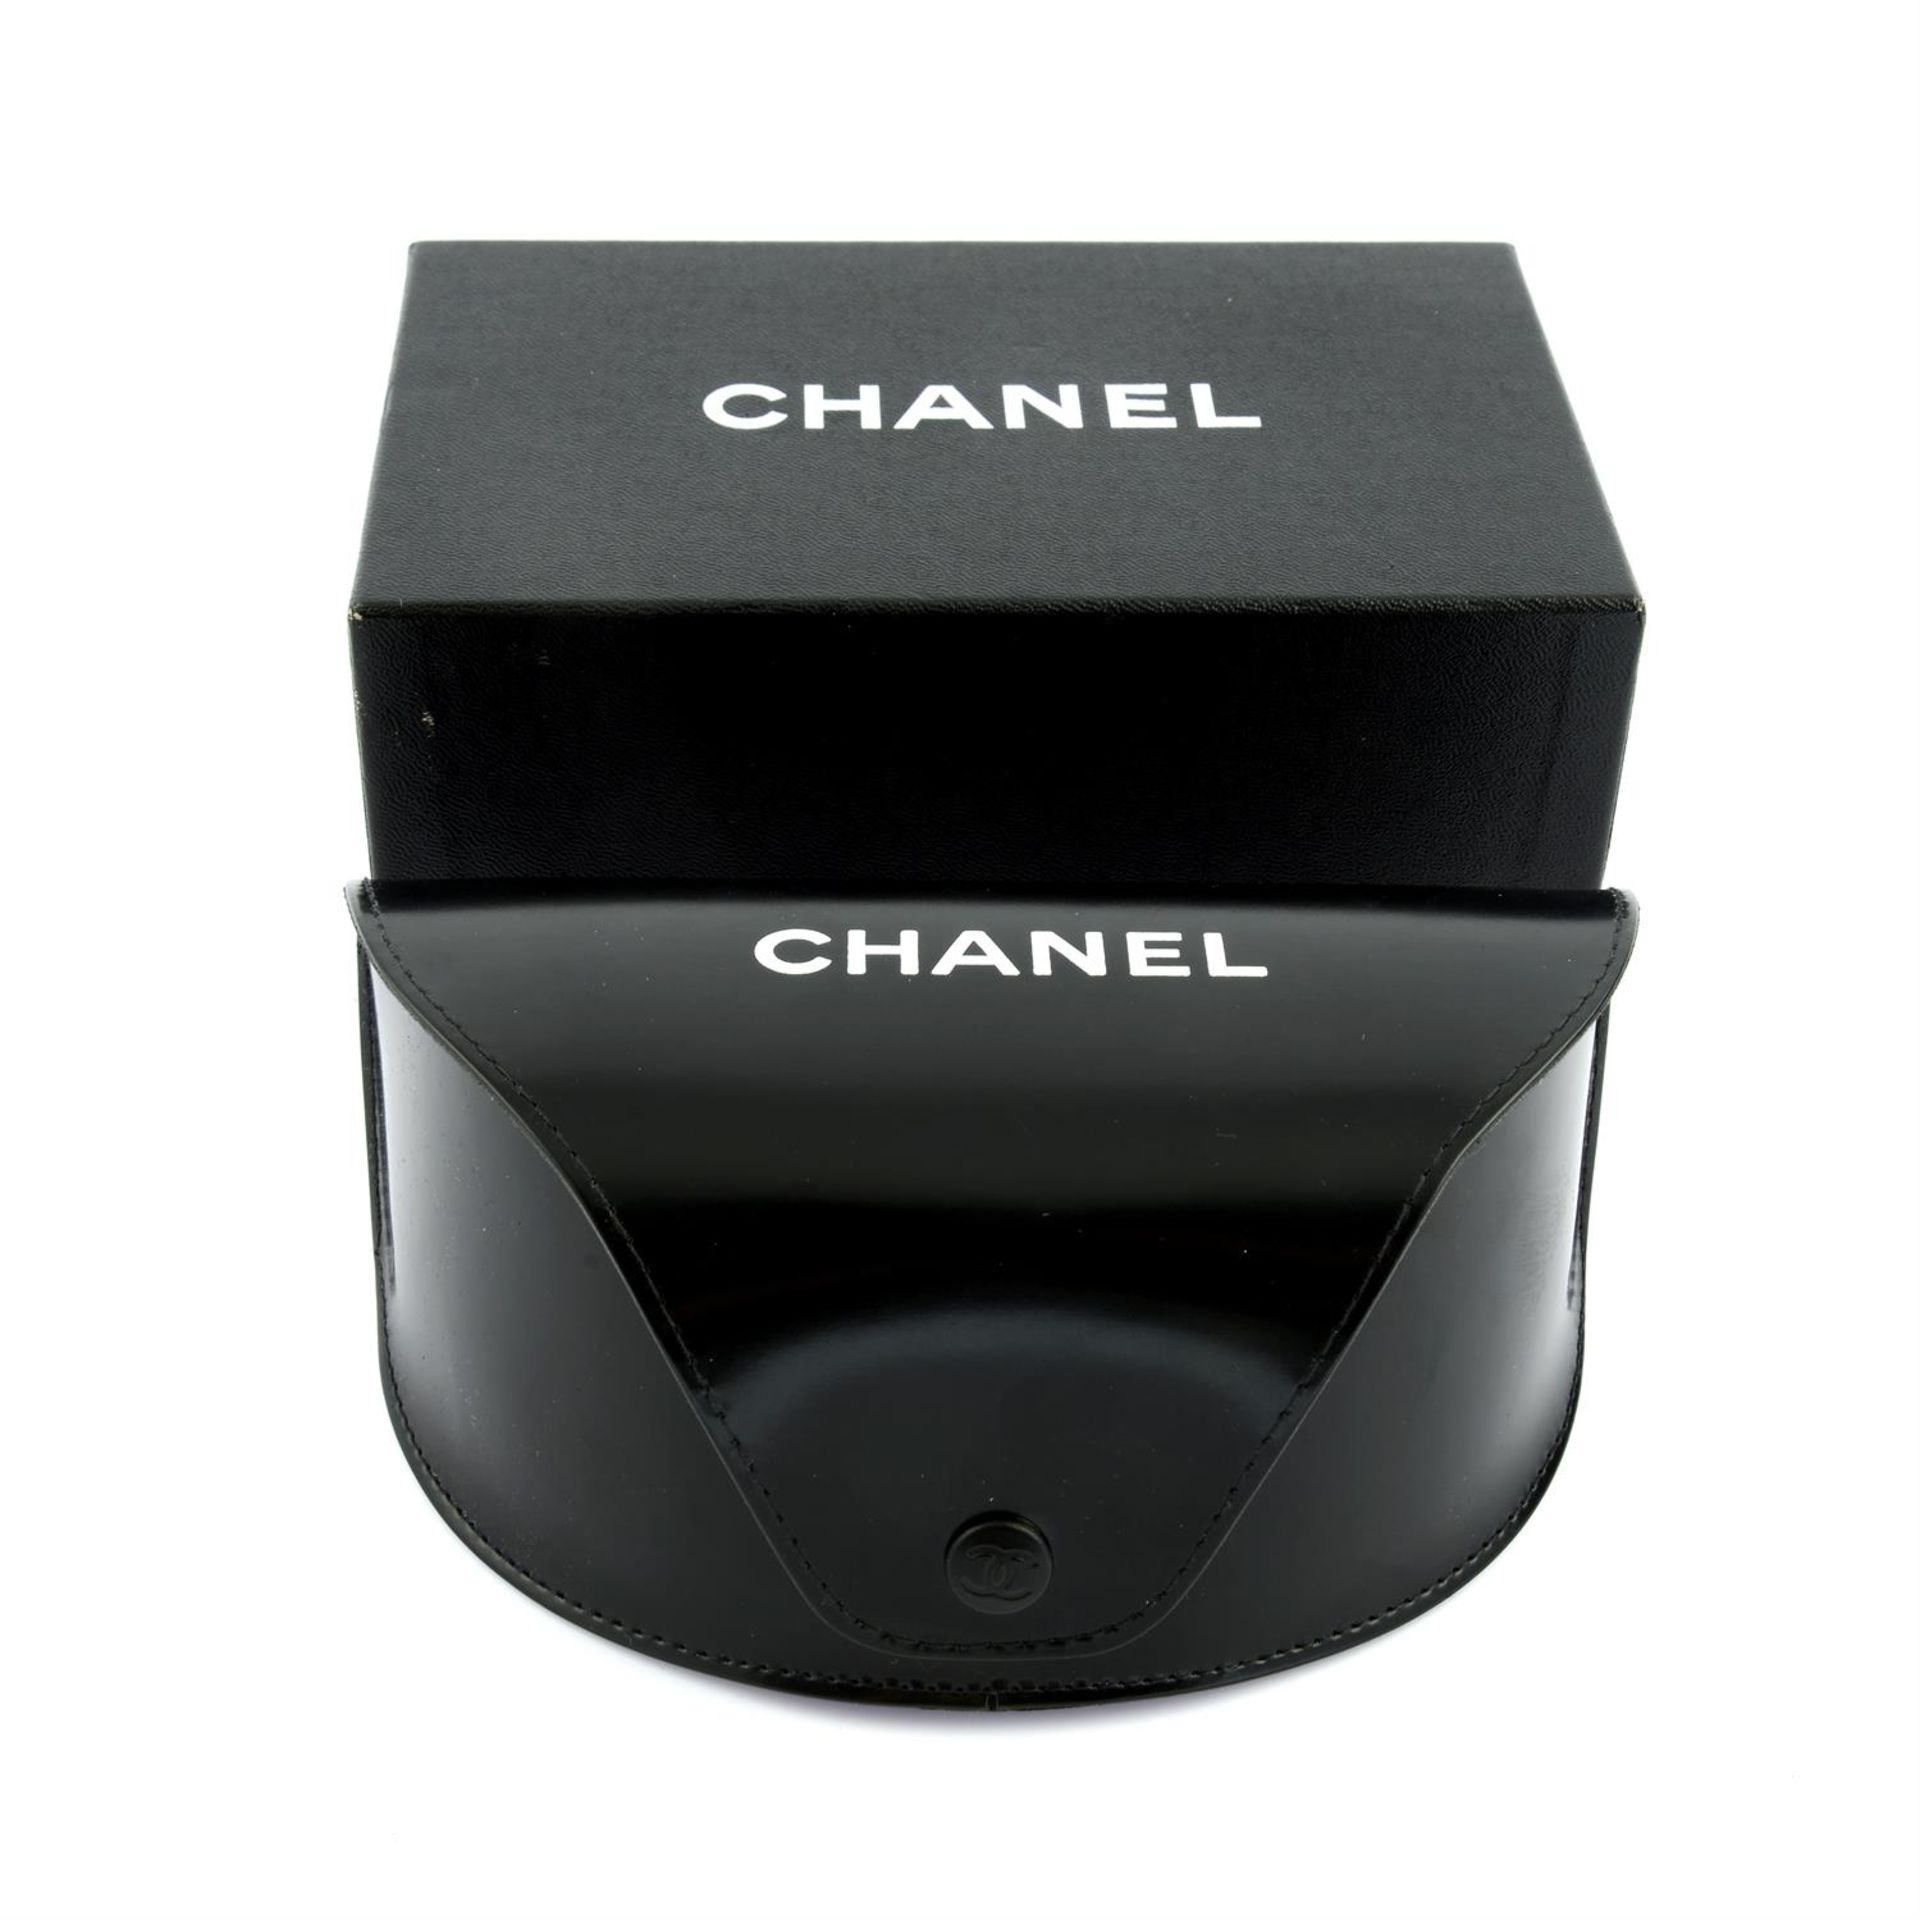 CHANEL - a pair of sunglasses. - Image 3 of 3